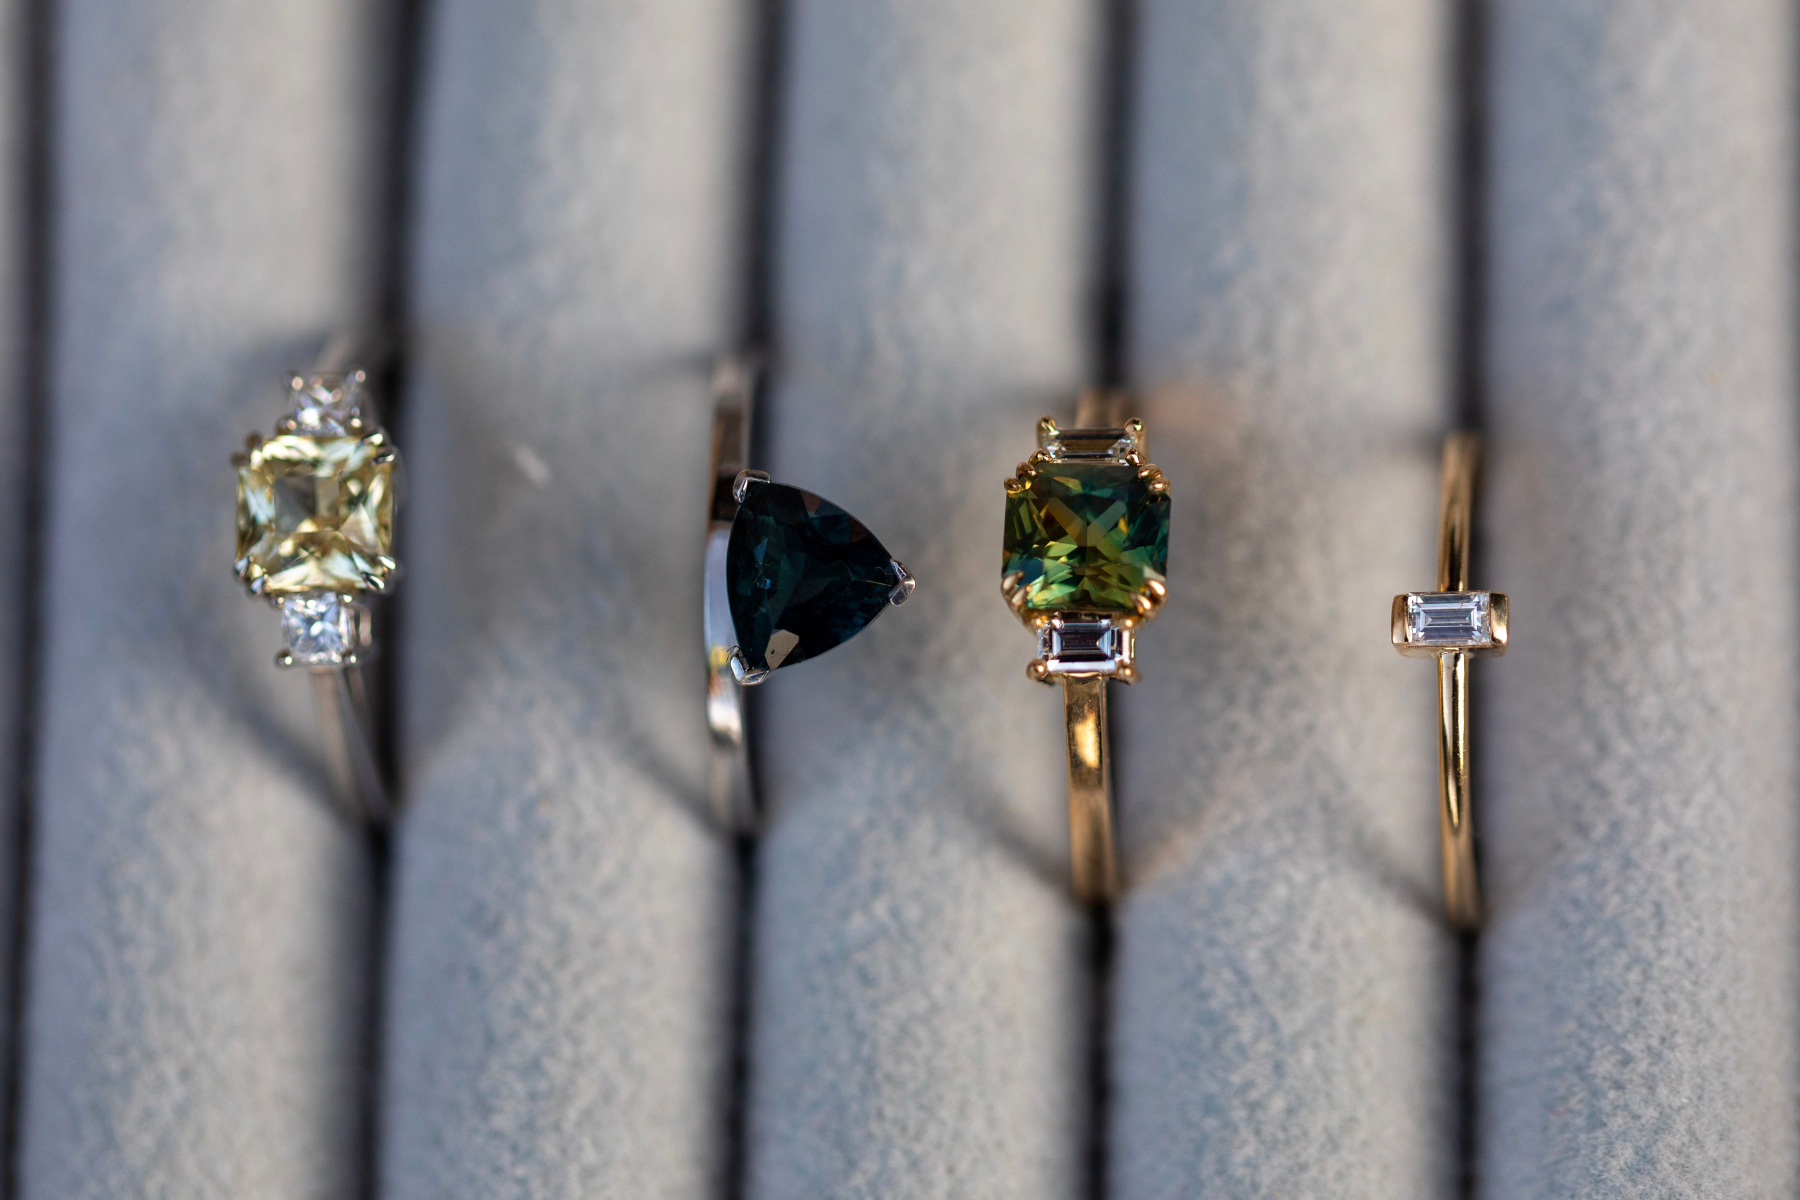 The image shows four distinct cuts of gemstone rings